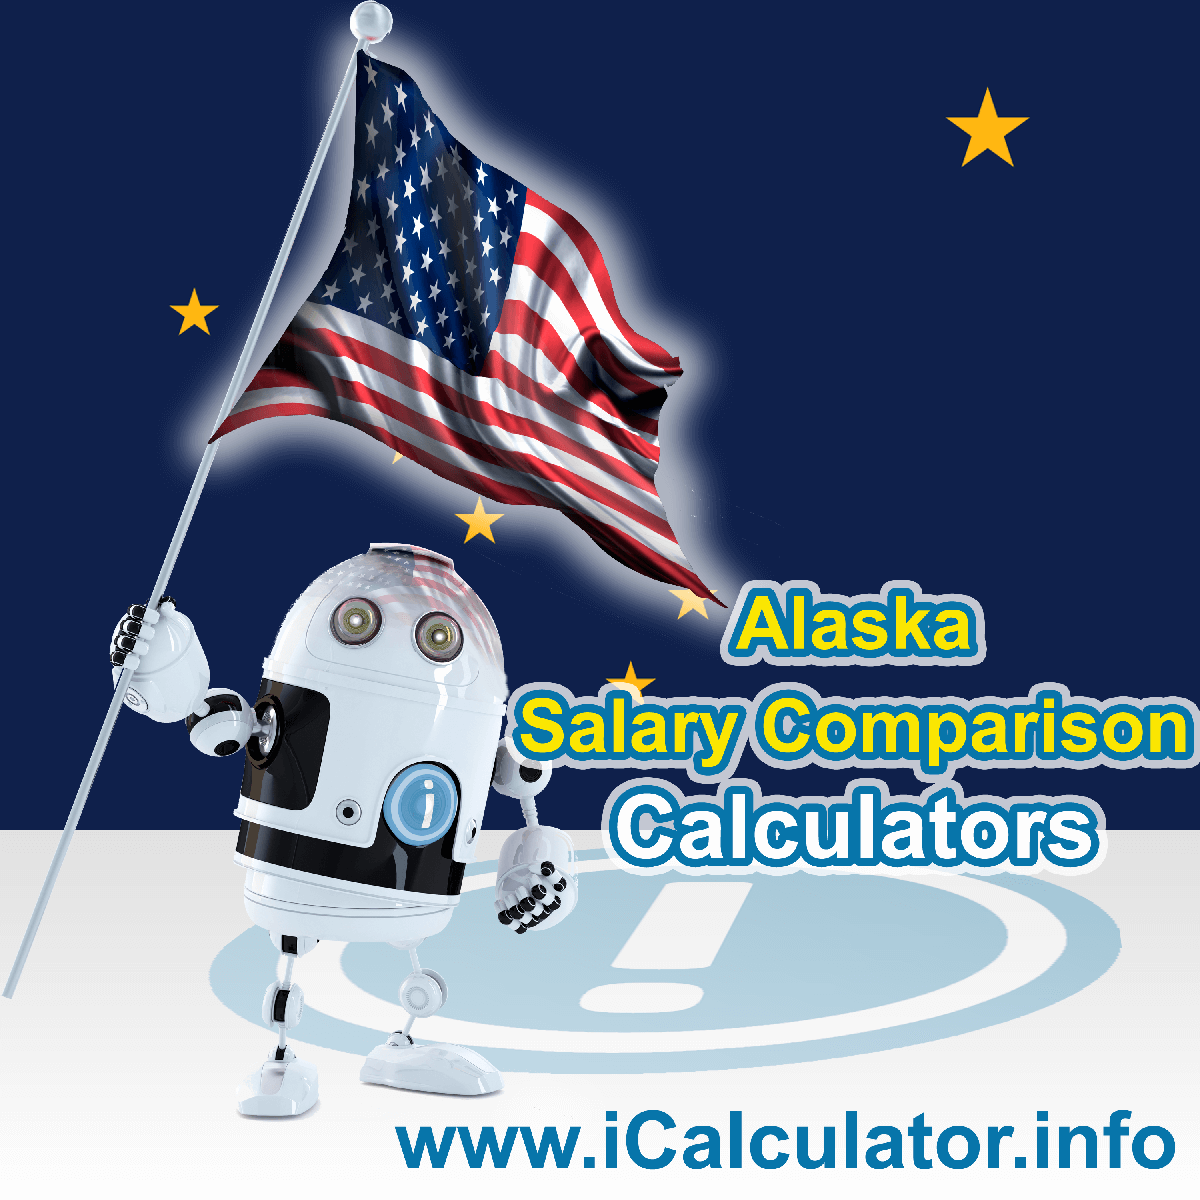 Alaska Salary Comparison Calculator 2023 | iCalculator™ | The Alaska Salary Comparison Calculator allows you to quickly calculate and compare upto 6 salaries in Alaska or compare with other states for the 2023 tax year and historical tax years. 